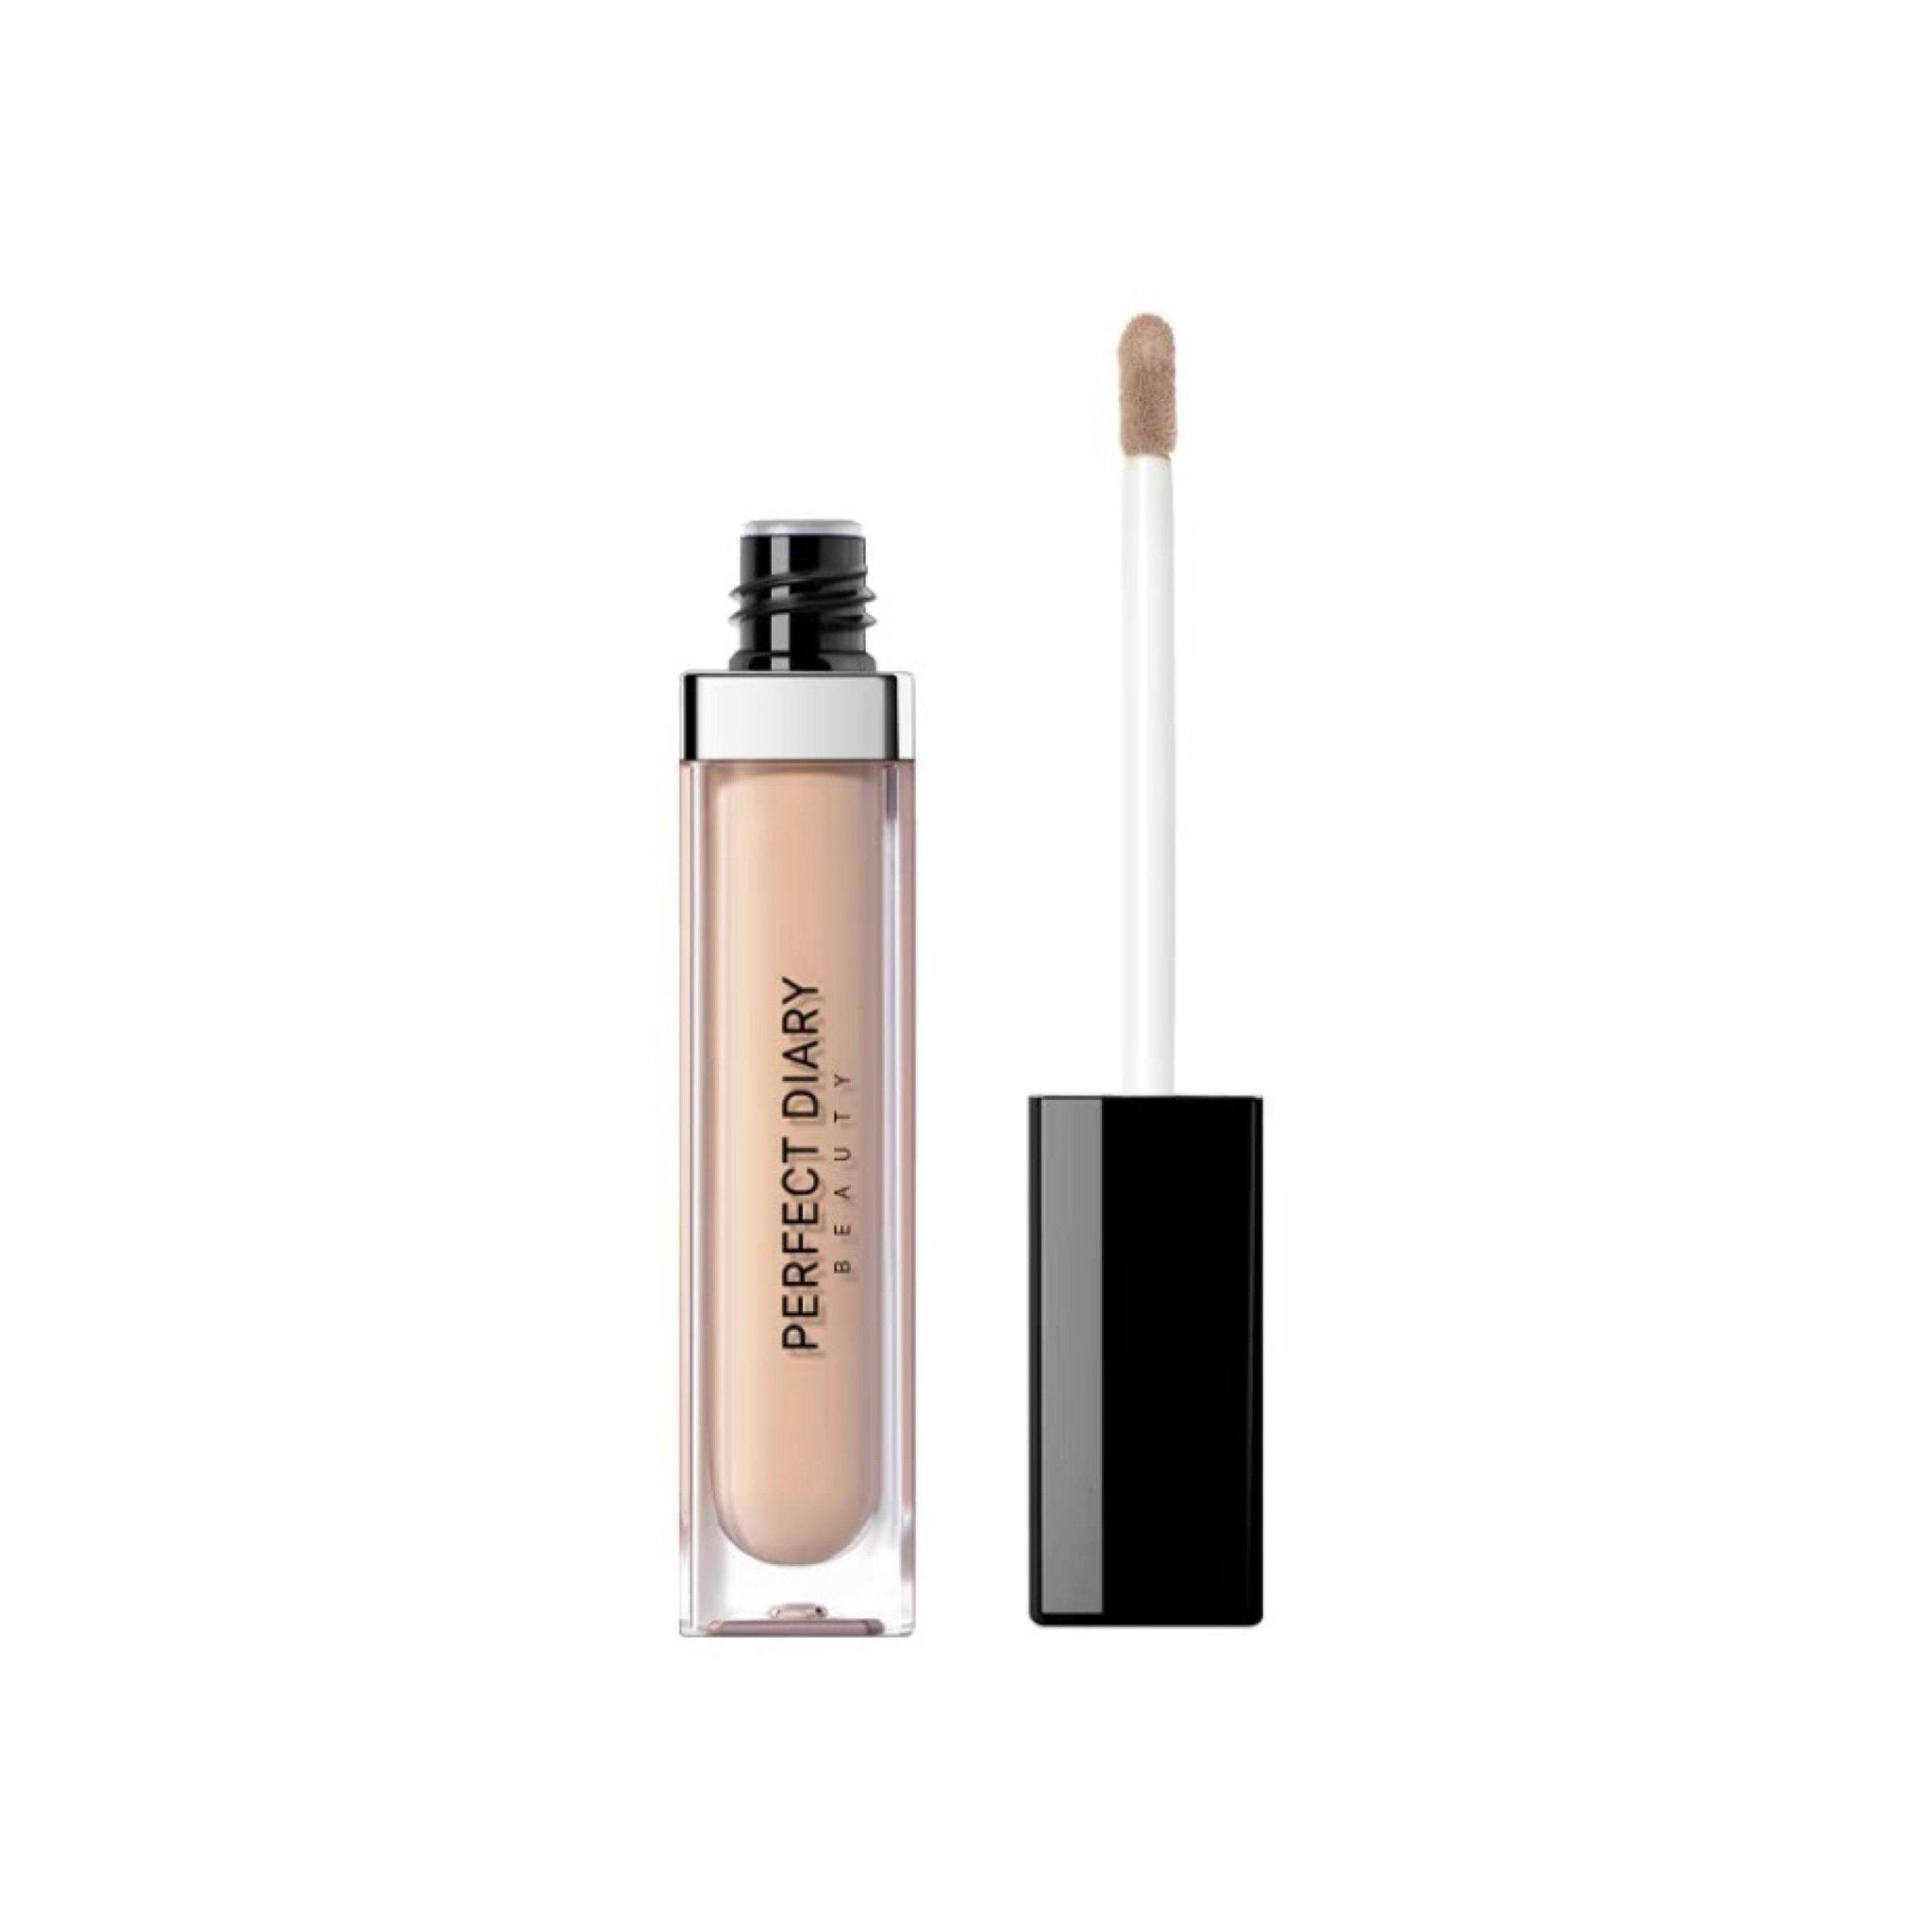 Perfect Diary Flawless Glaze Silky Touch Liquid Concealer PD008 - Chic Decent